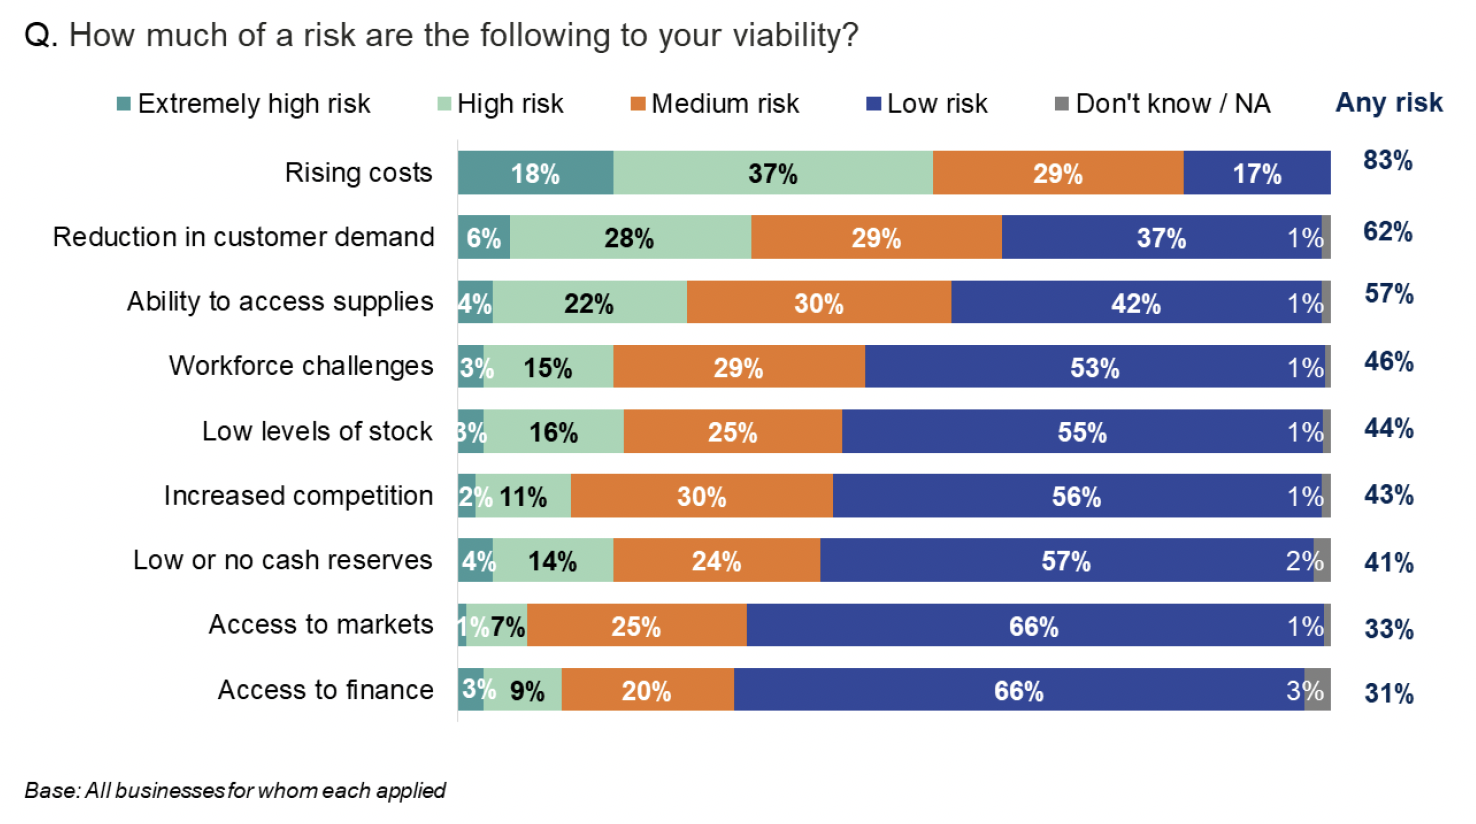 Bar chart showing the scale of risk to viability across several factors. Rising costs was deemed the largest risk followed by reduction in customer demand.